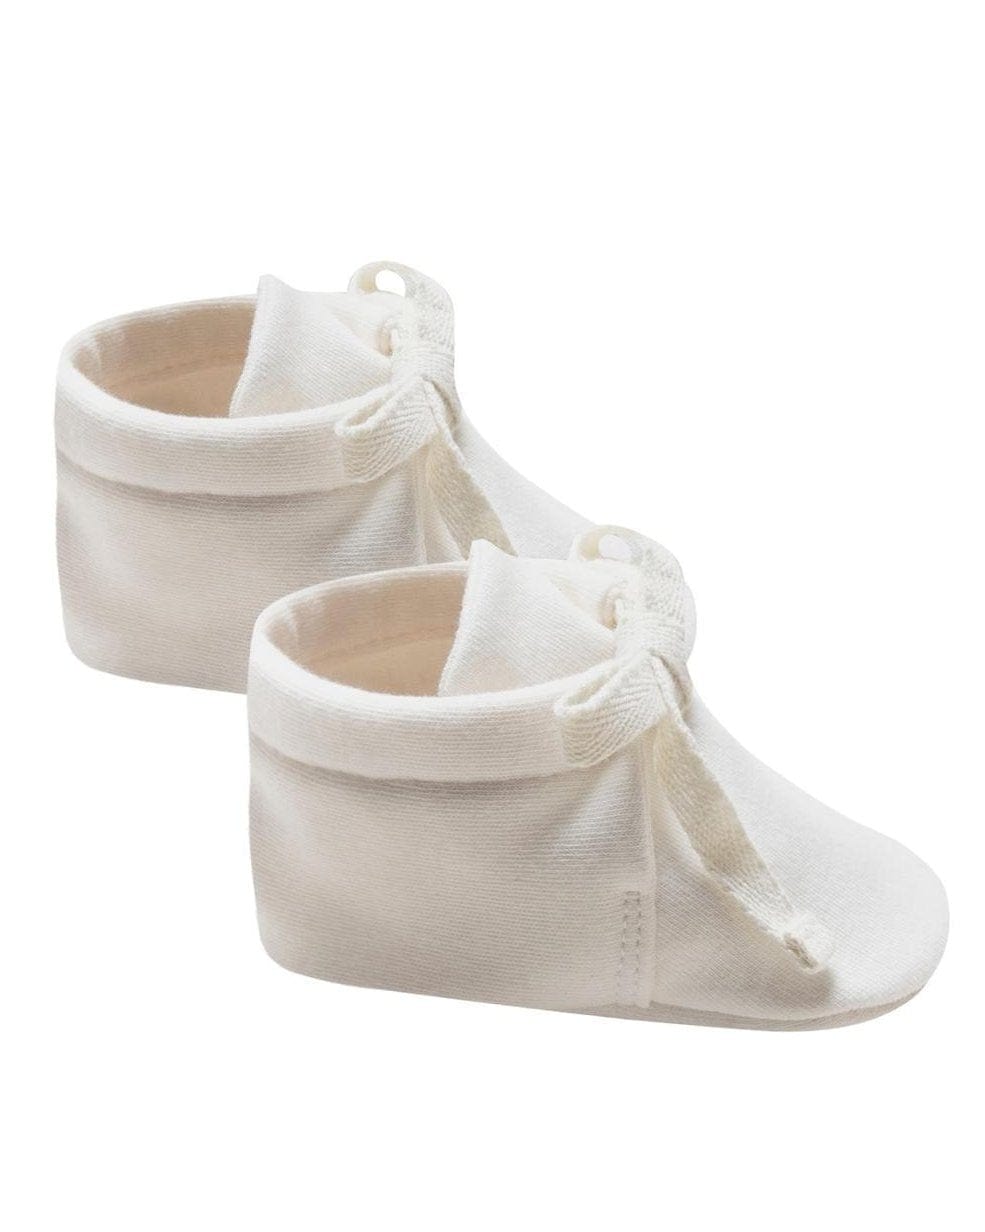 quincy mae baby booties in ivory - Little